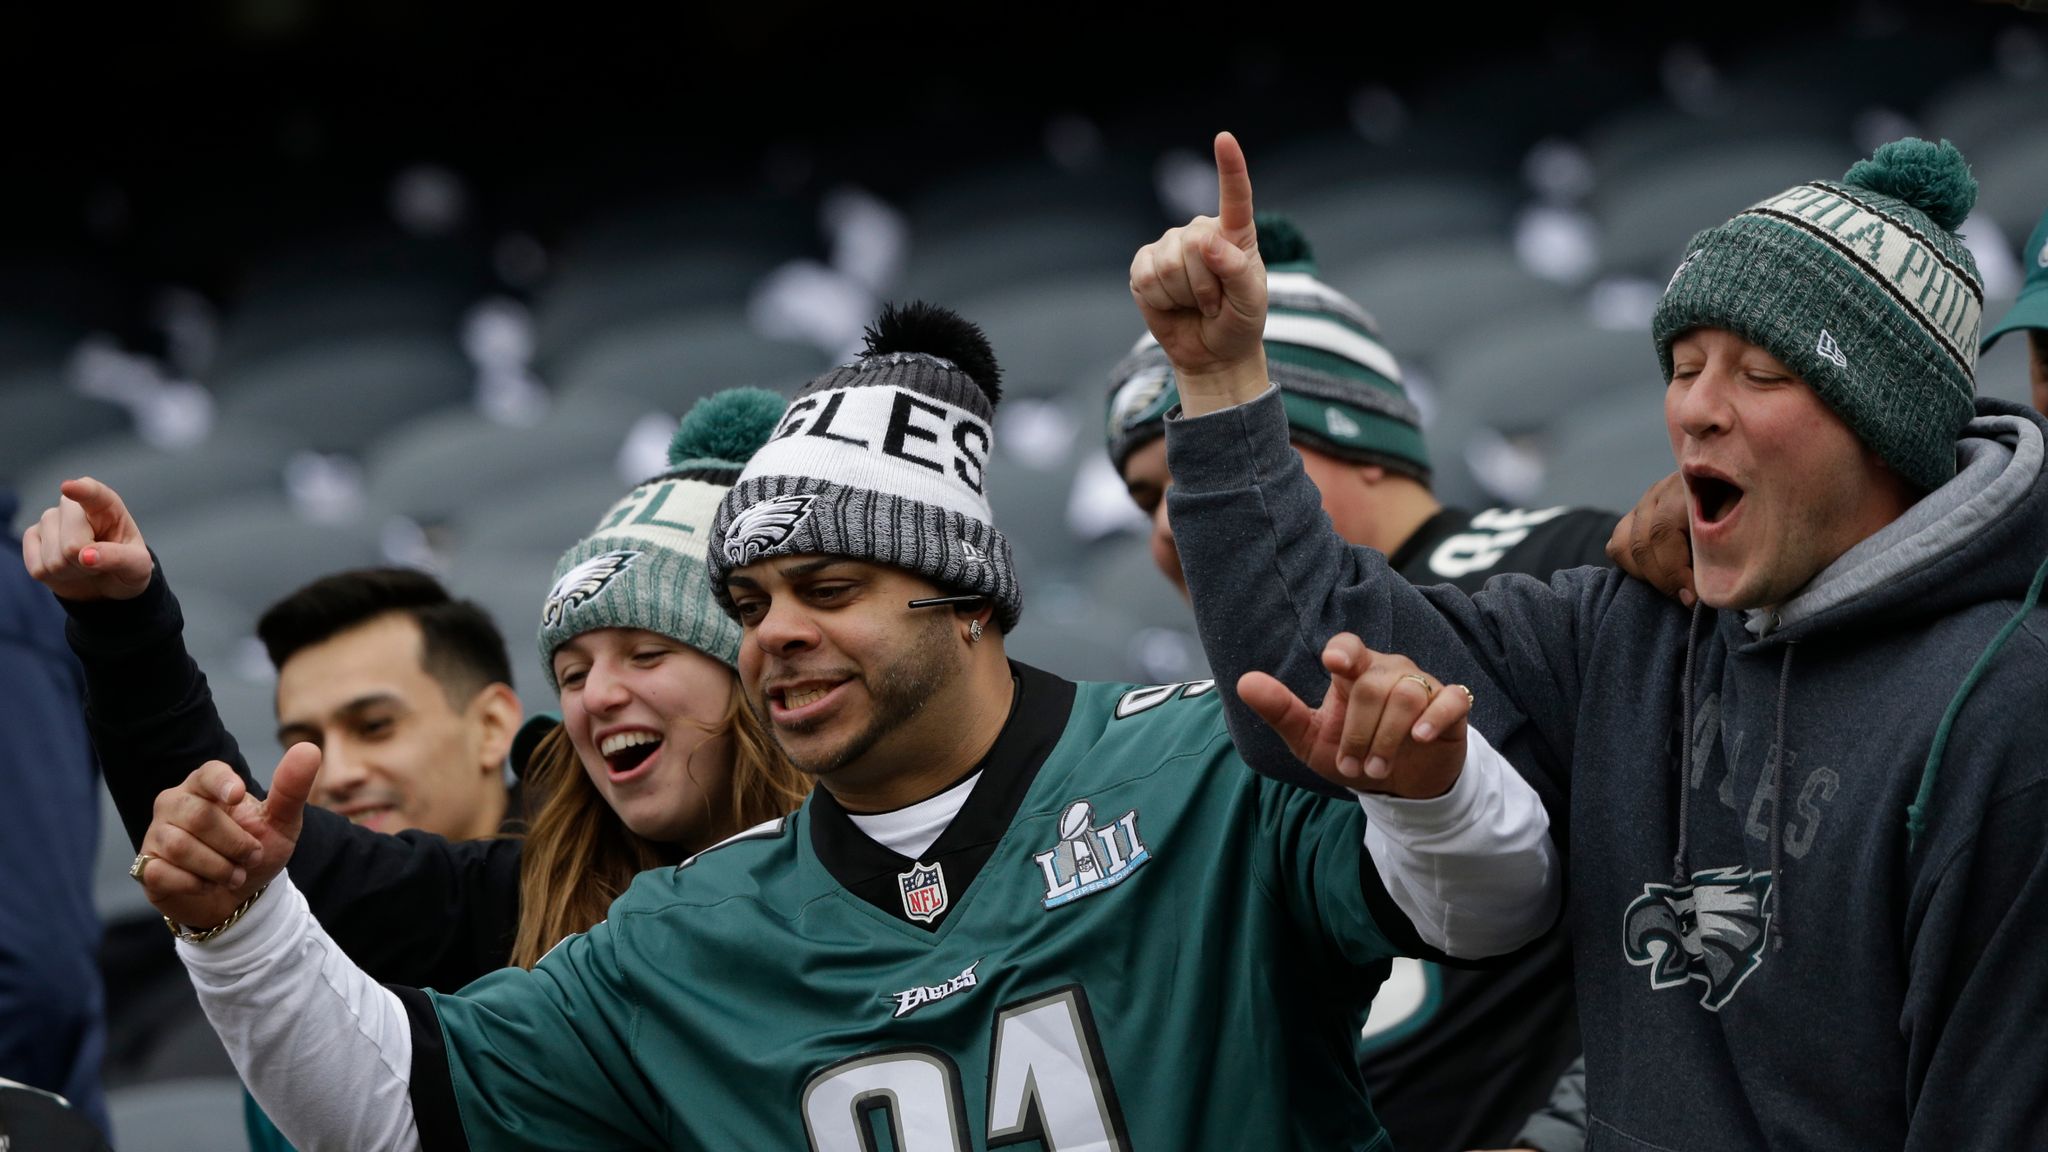 PHILADELPHIA EAGLES FANS will be allowed to return to Lincoln